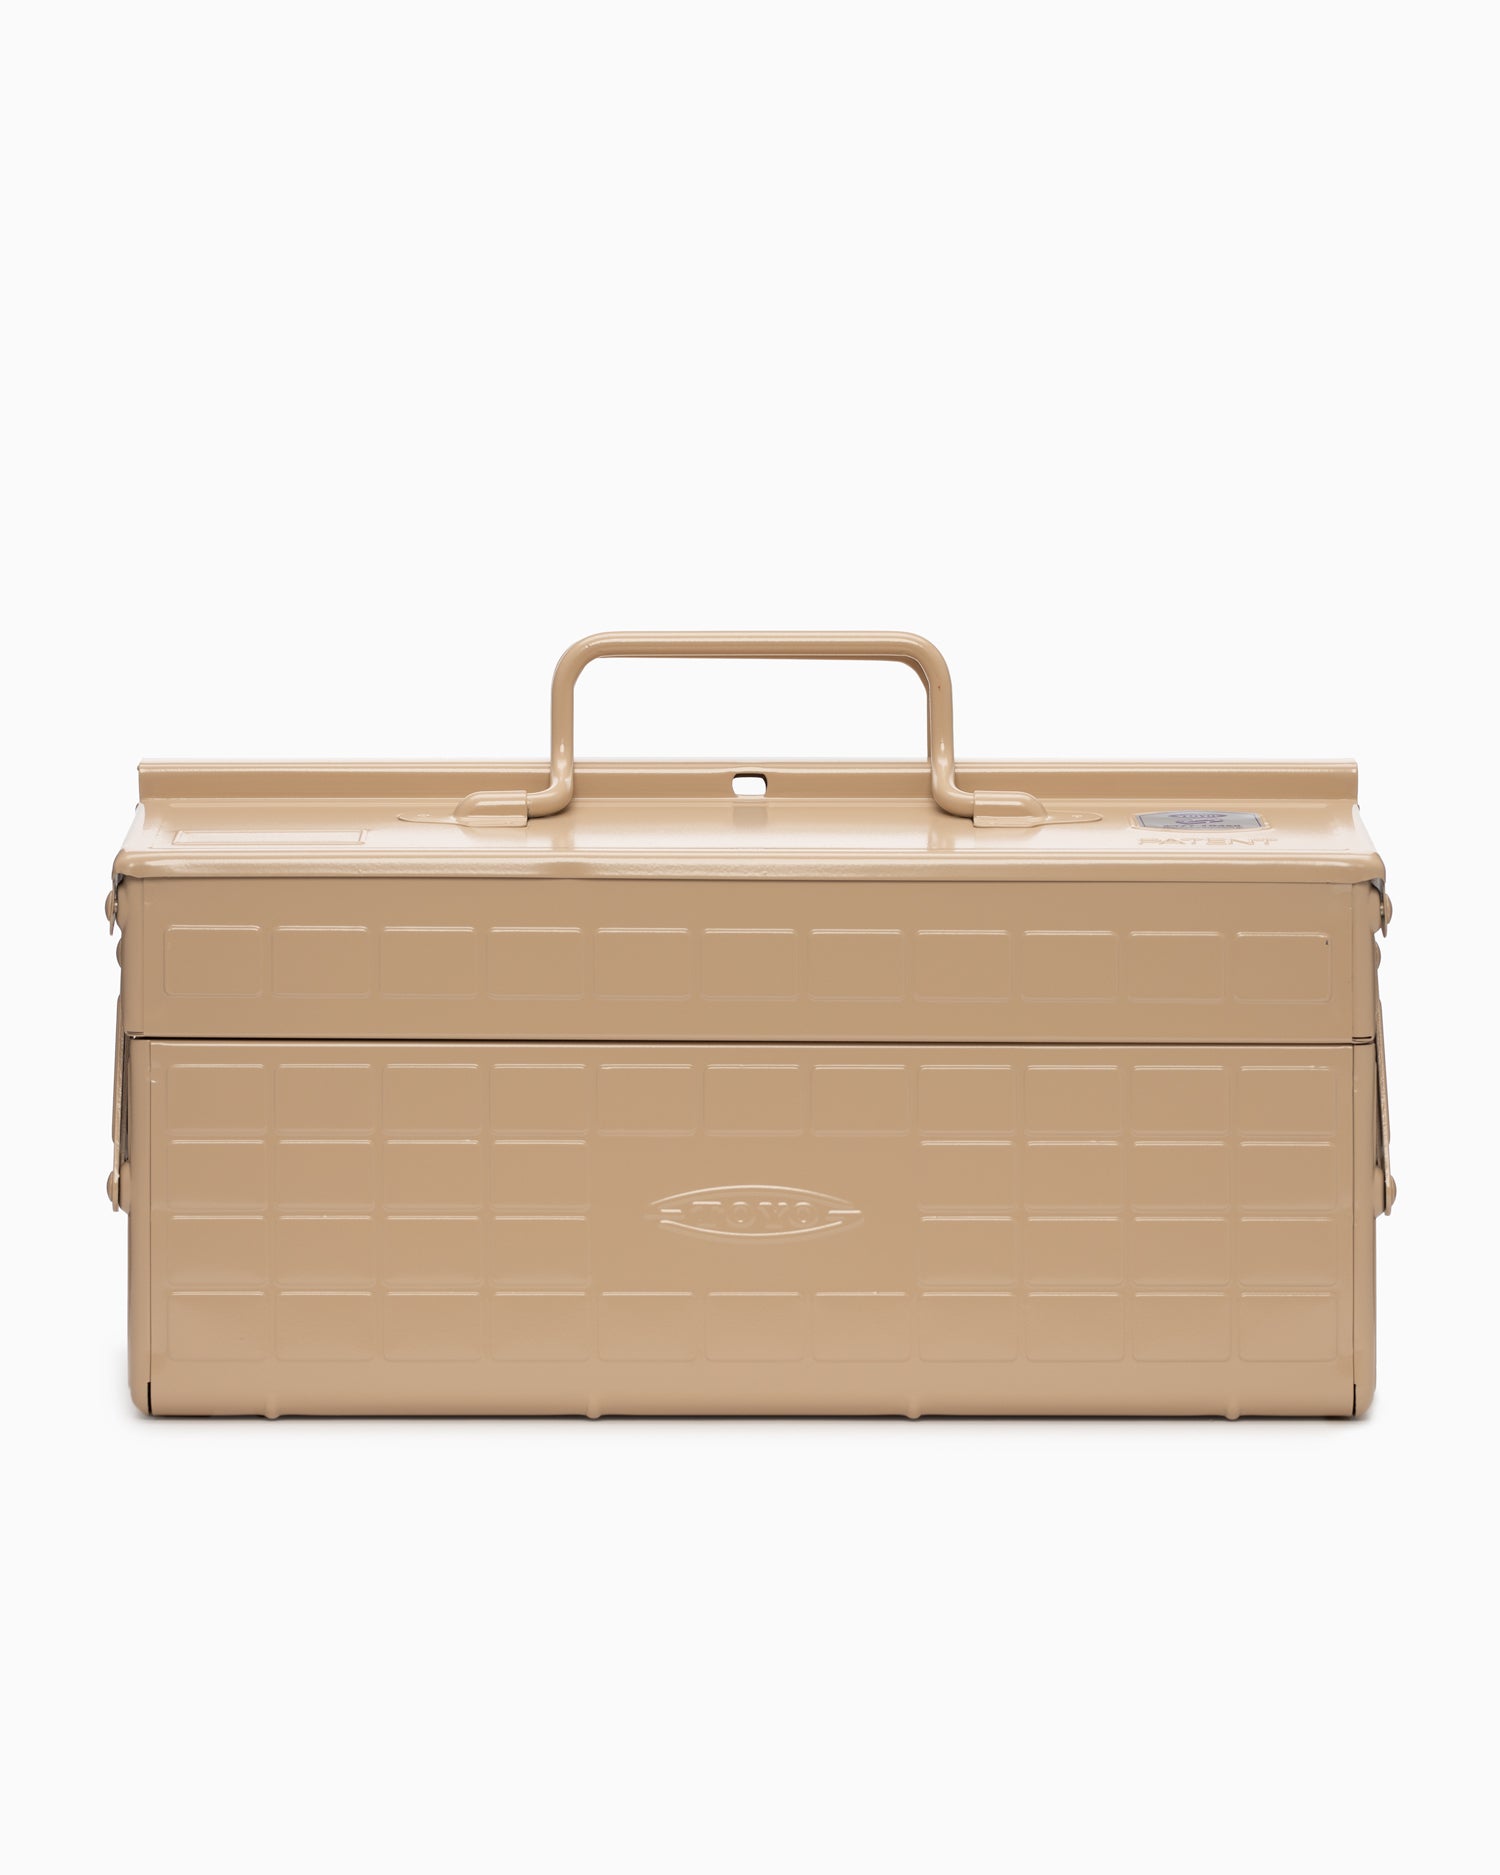 Two Stage ST-350 Toolbox - Beige